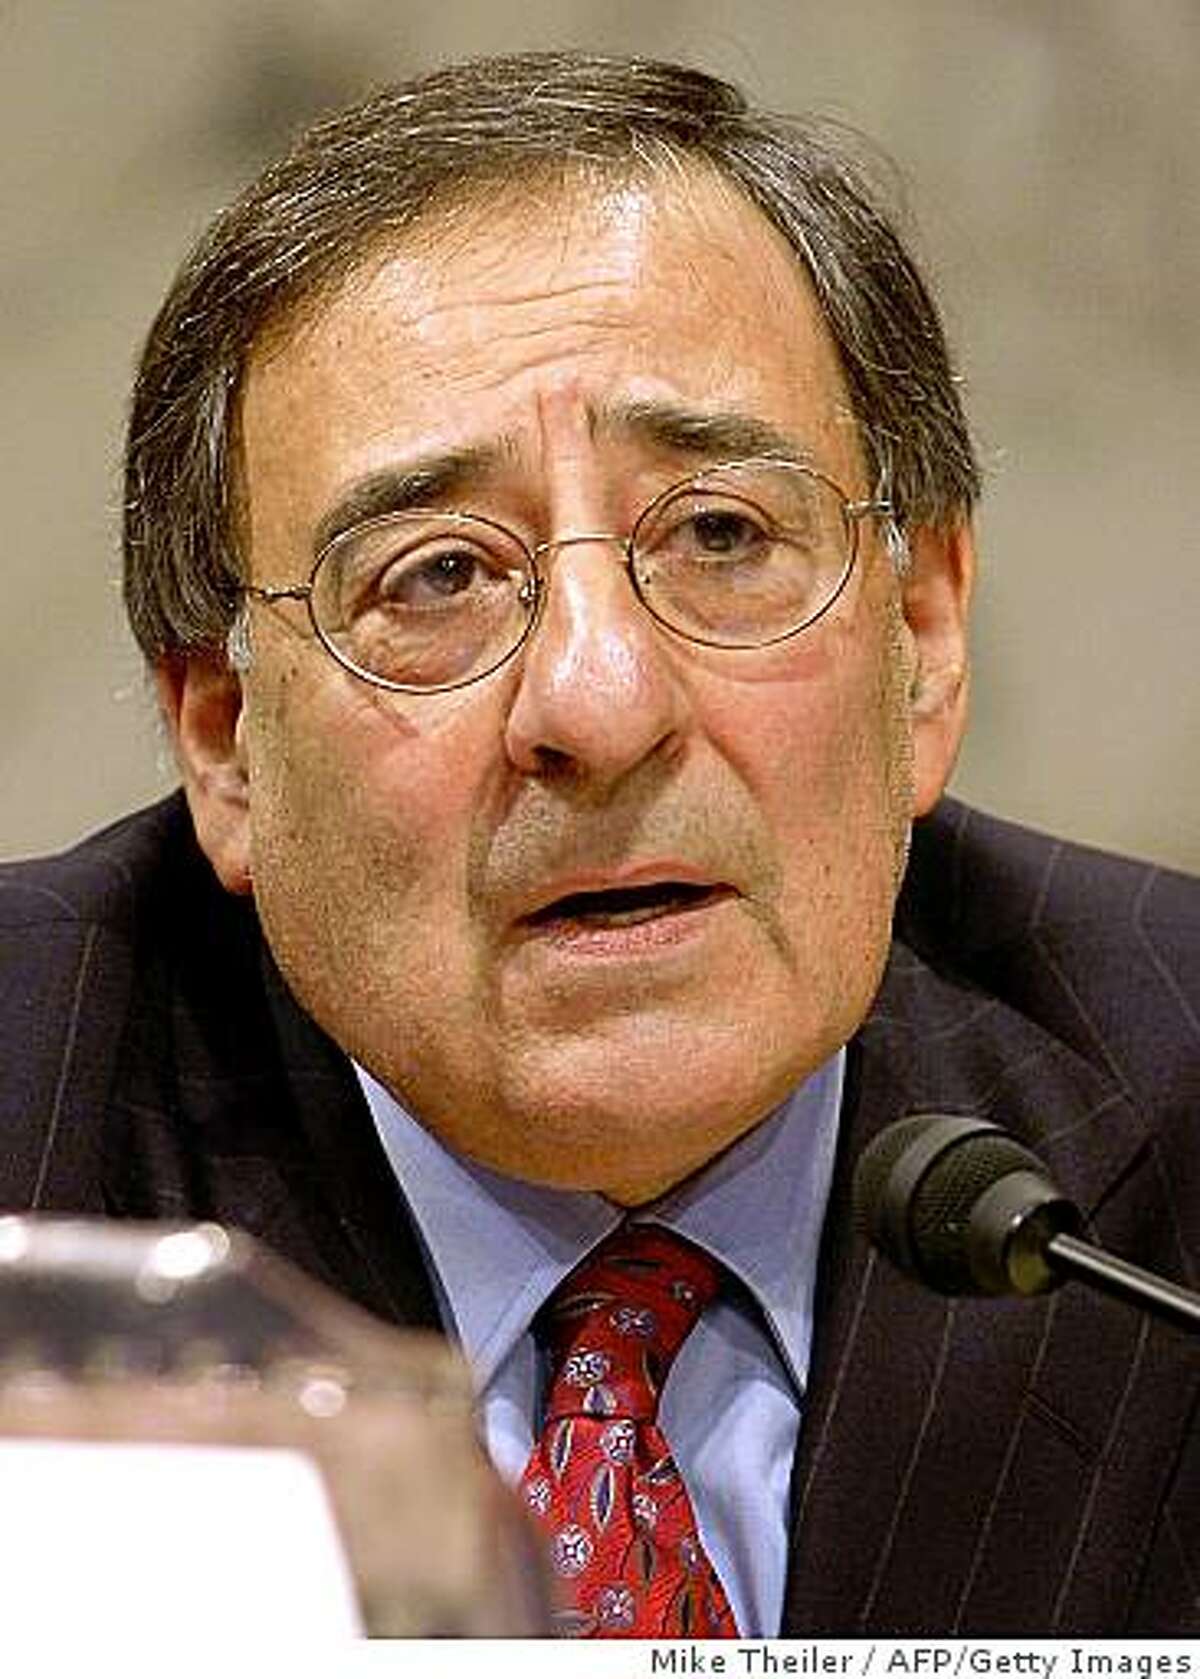 Washington, UNITED STATES: Iraq Study Group member and former Clinton Chief of Staff Leon E. Panetta makes remarks during a news conference after the Iraq Study Group delivered their report to President Bush and Congress, 06 December 2006 in Washington,DC. The bi-partisan group reported that the situation in Iraq is "grave and deteriorating", and offered recommendations to be taken. AFP PHOTO/Mike Theiler (Photo credit should read MIKE THEILER/AFP/Getty Images)